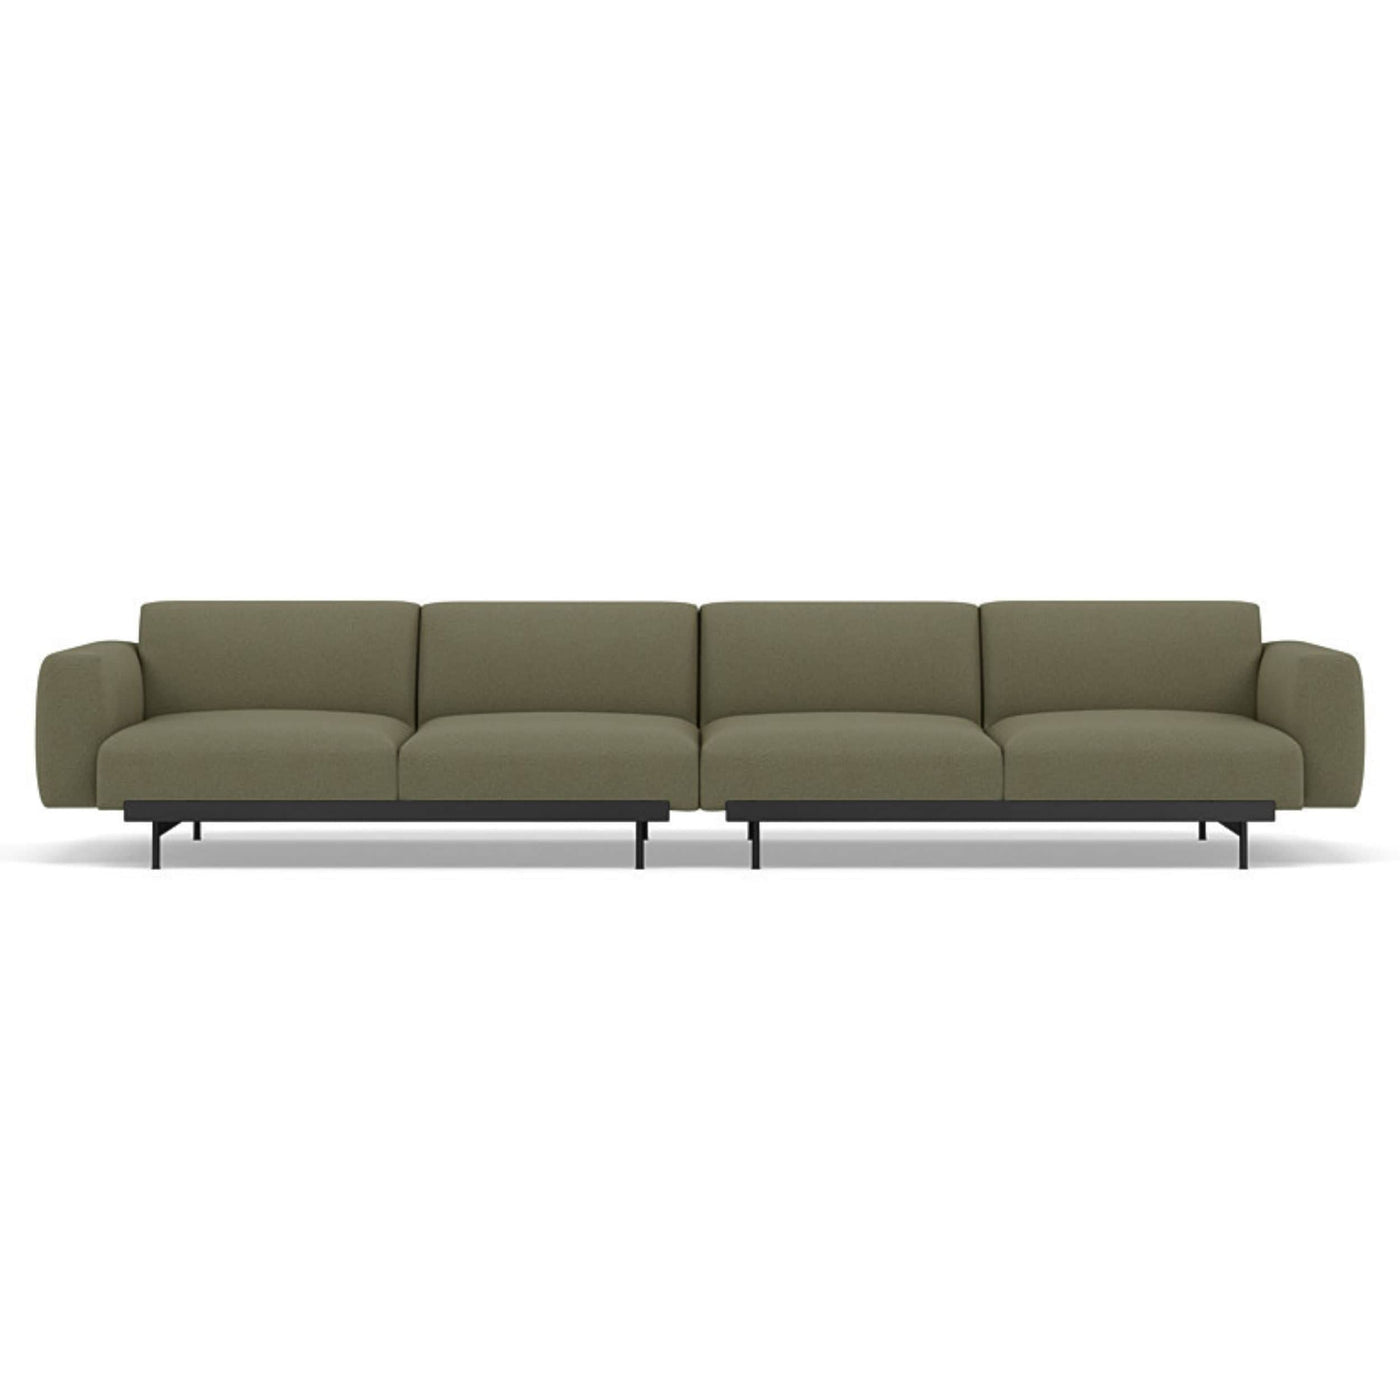 Muuto In Situ Modular 4 Seater Sofa configuration 1. Made to order from someday designs. #colour_clay-17